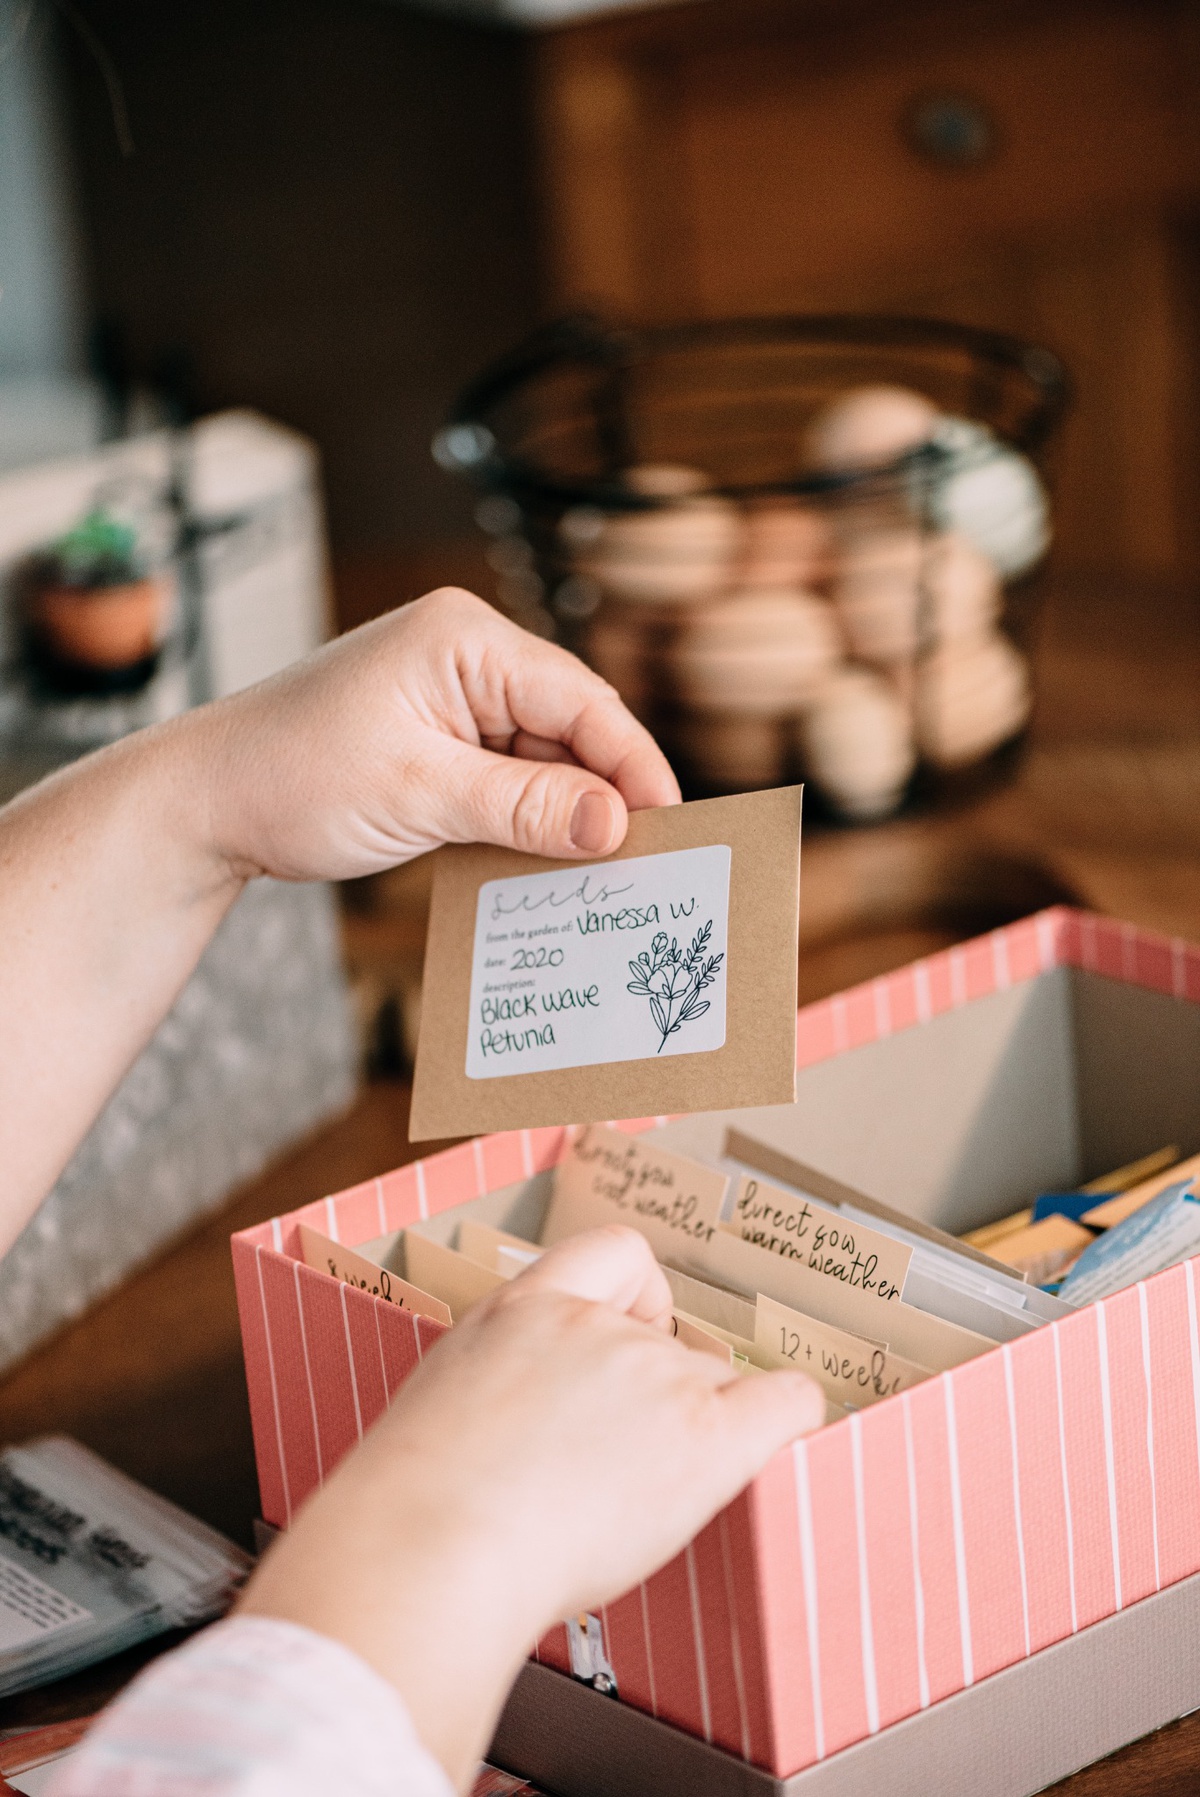 A hand holding a personalized seed packet with handwritten details, above a pink-striped box with more seed packets organized within.